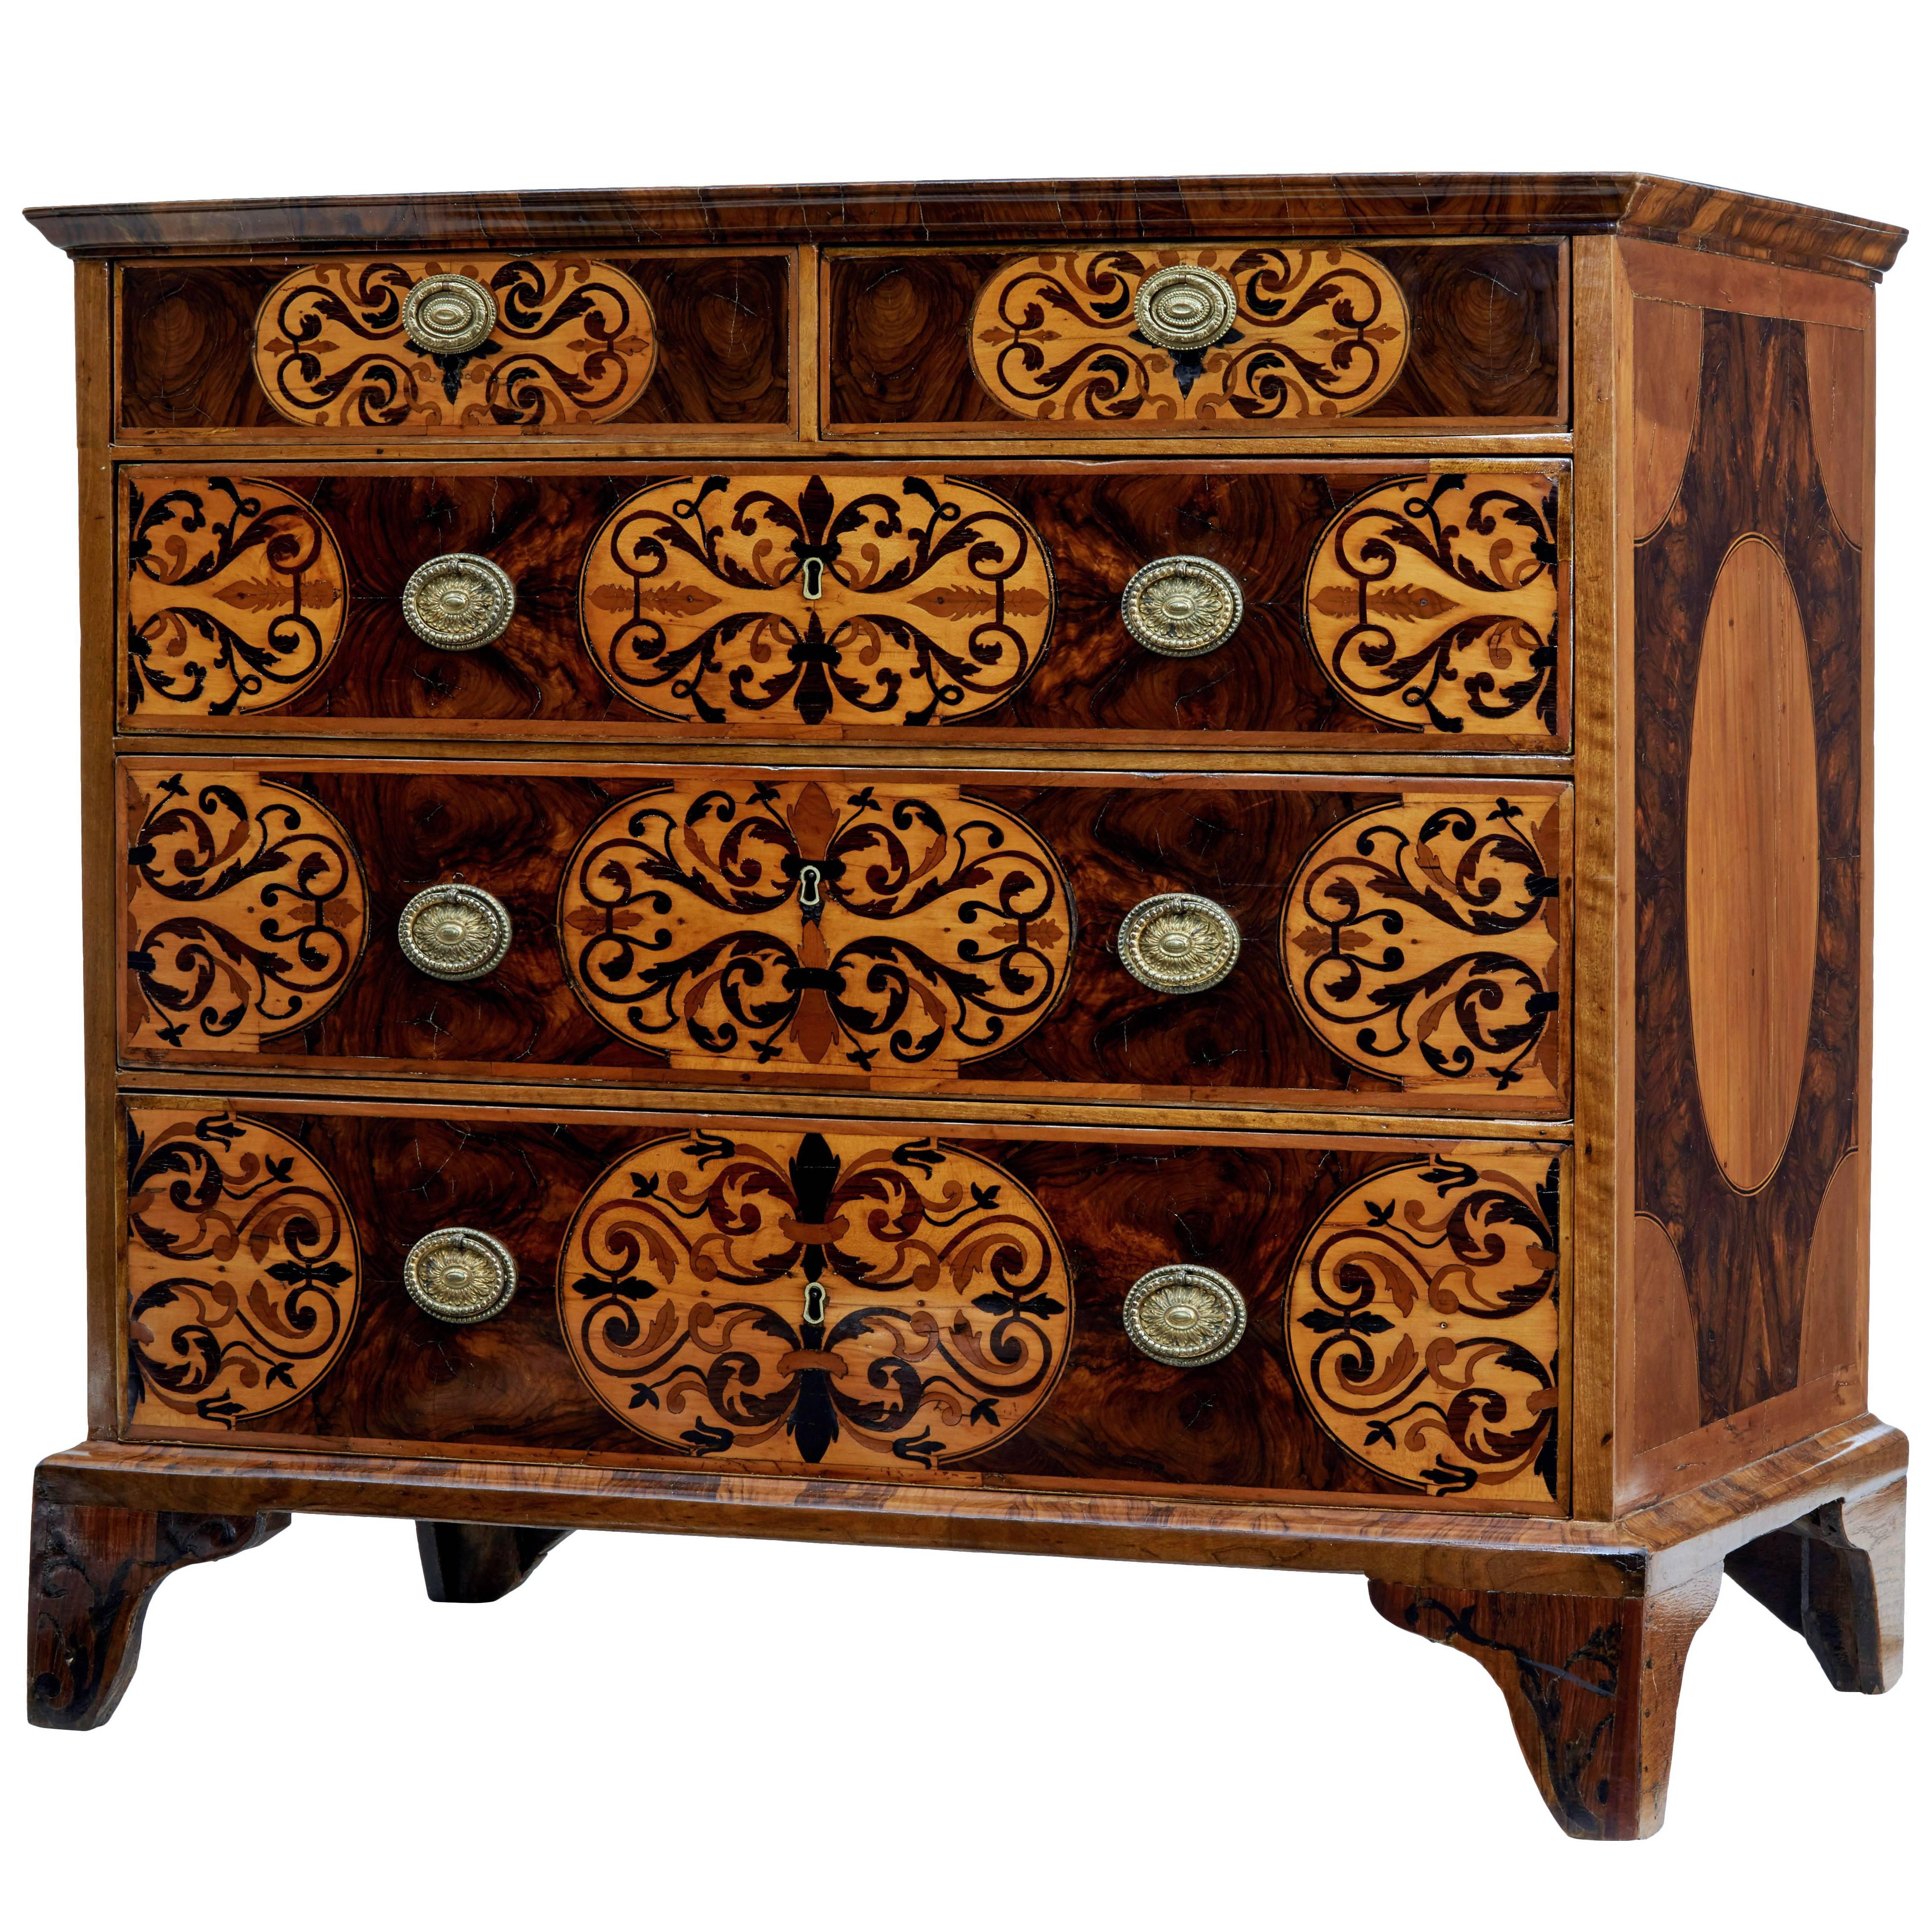 Early 18th Century Dutch Walnut Inlaid Chest of Drawers